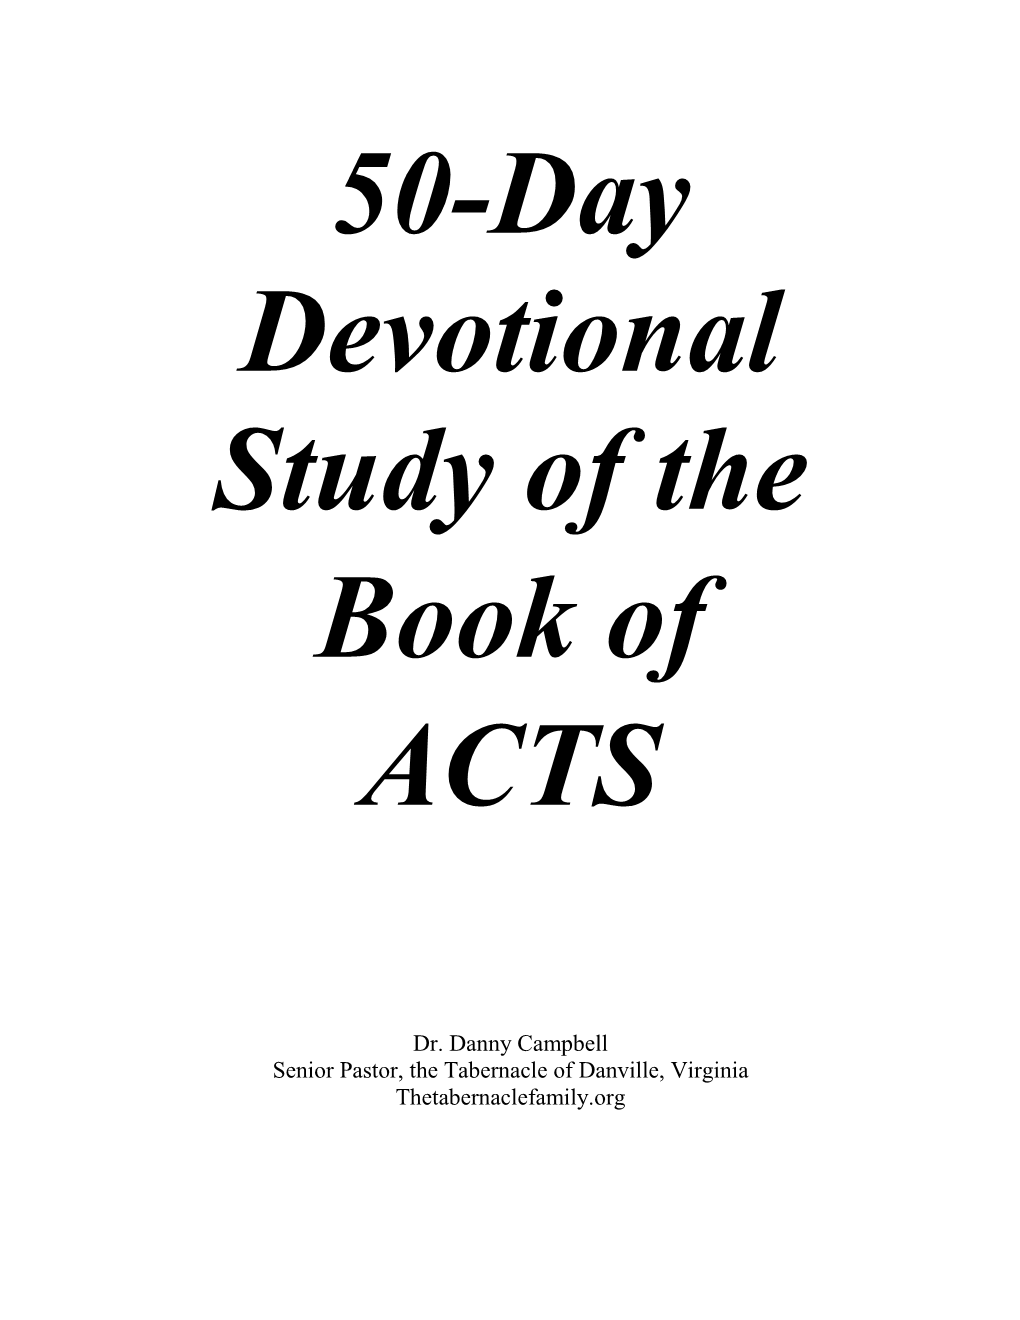 50-Day Devotional Study of the Book of ACTS